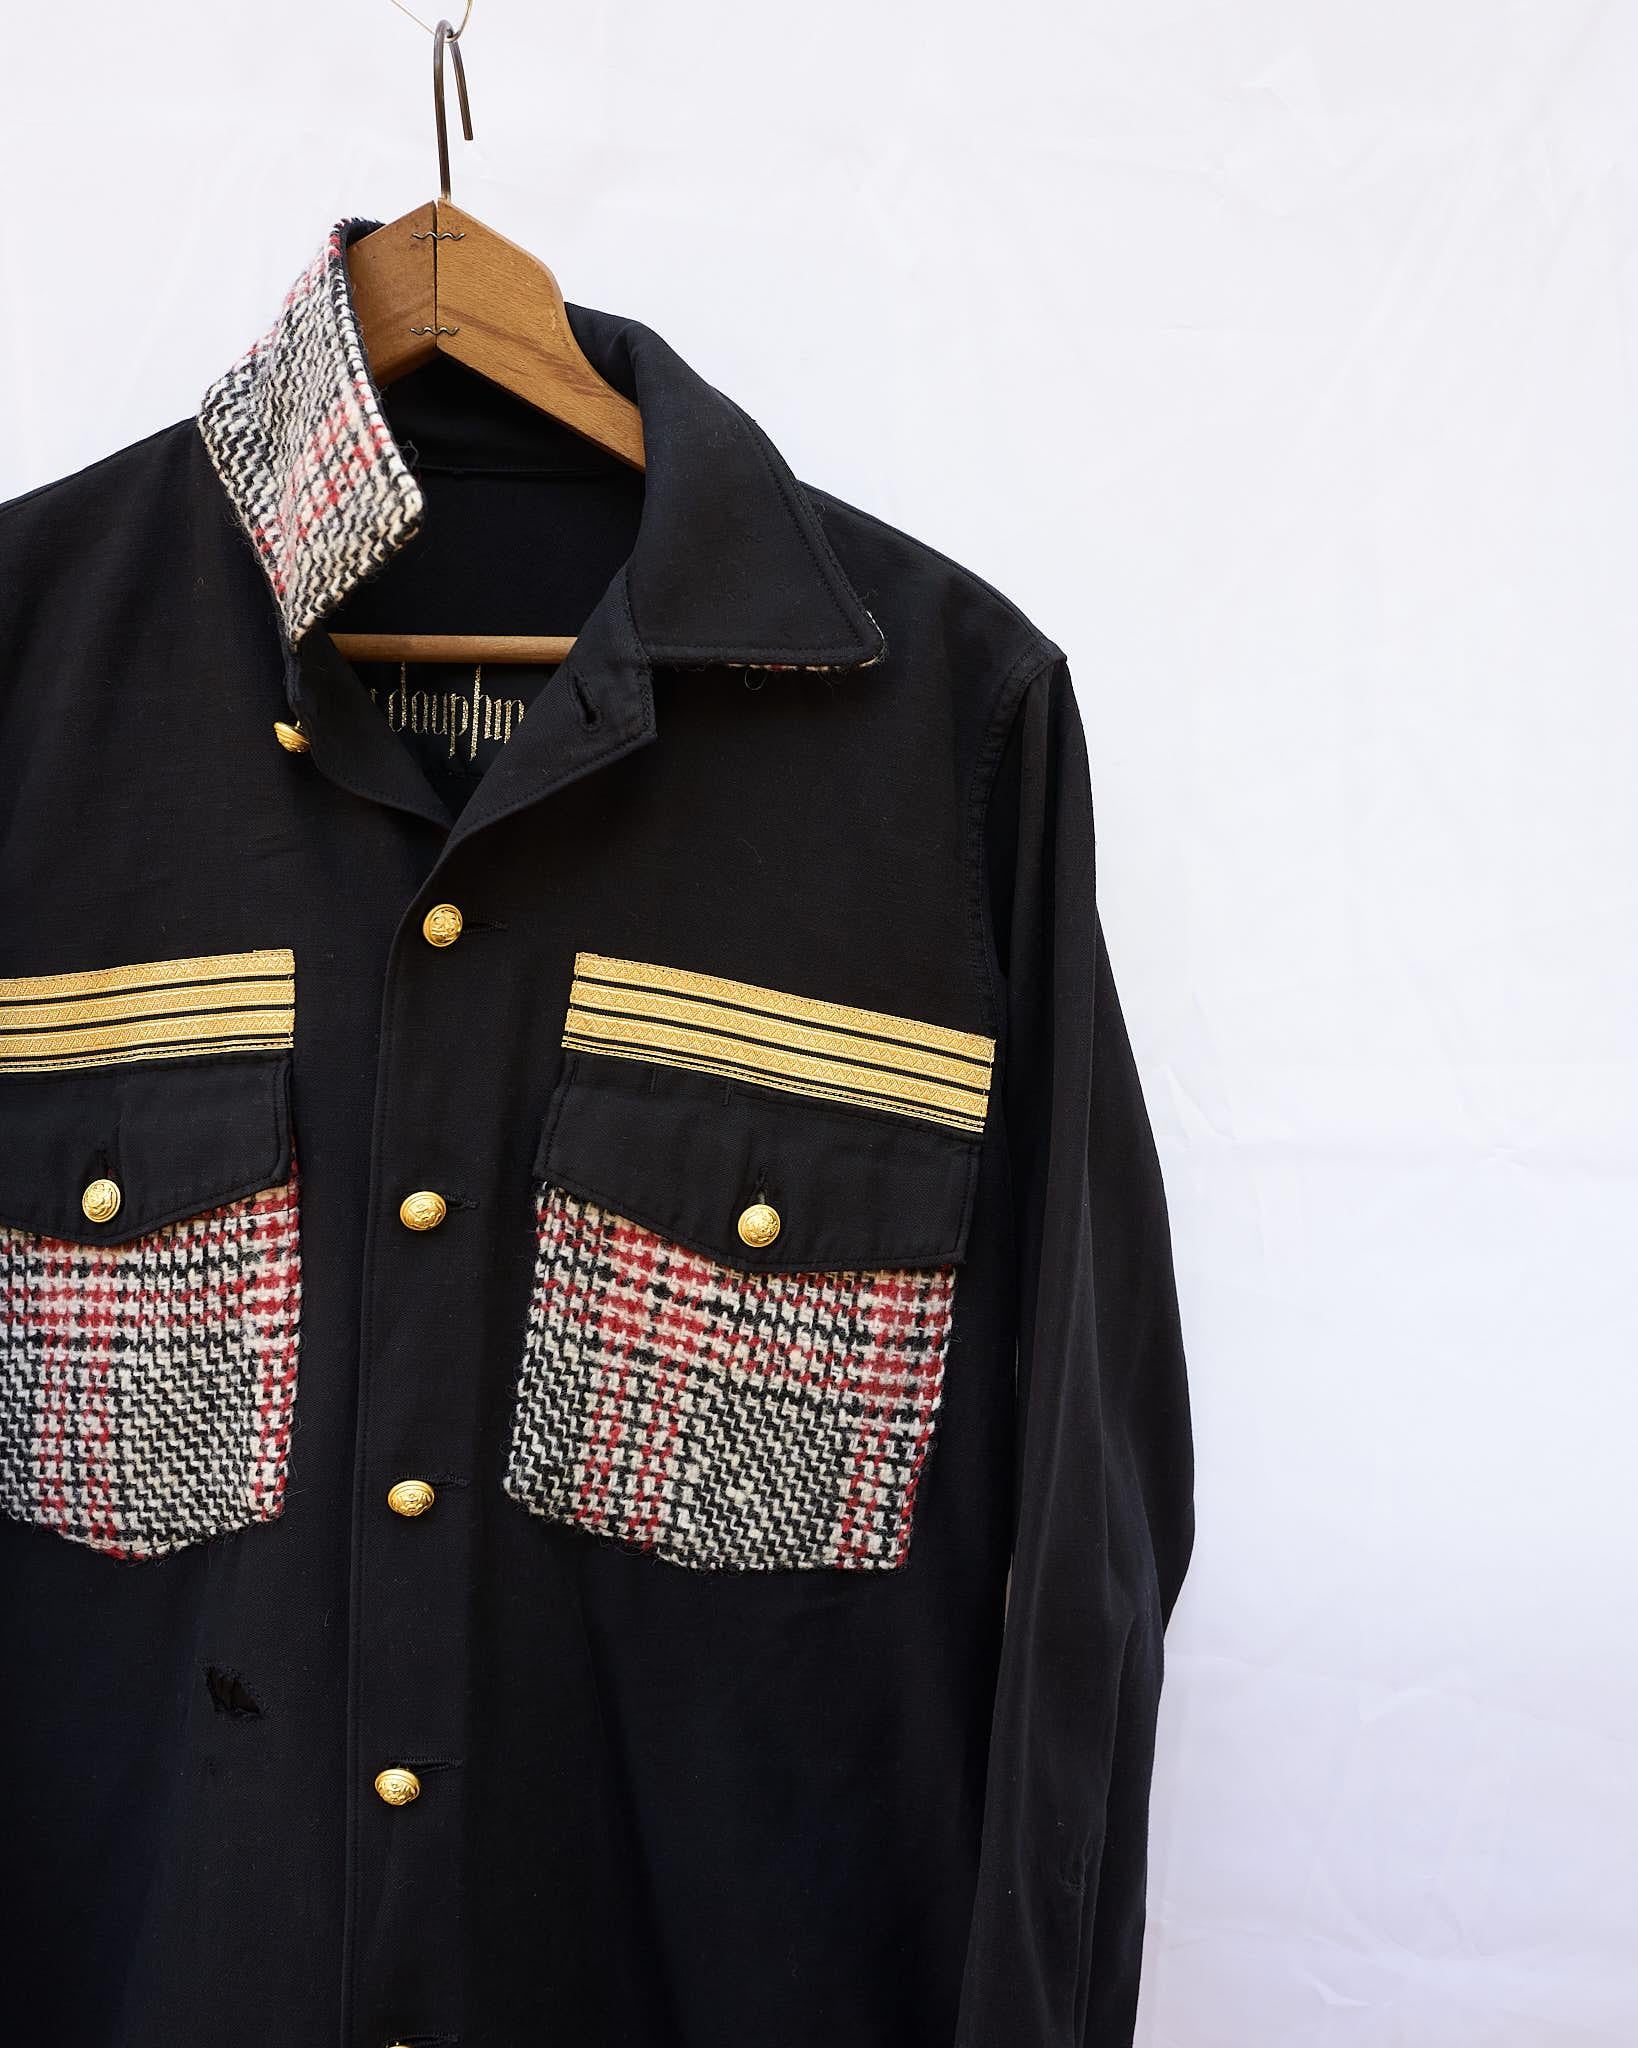 Embellished Jacket Black Military English Red White Black Tartan Wool J Dauphin In New Condition In Los Angeles, CA